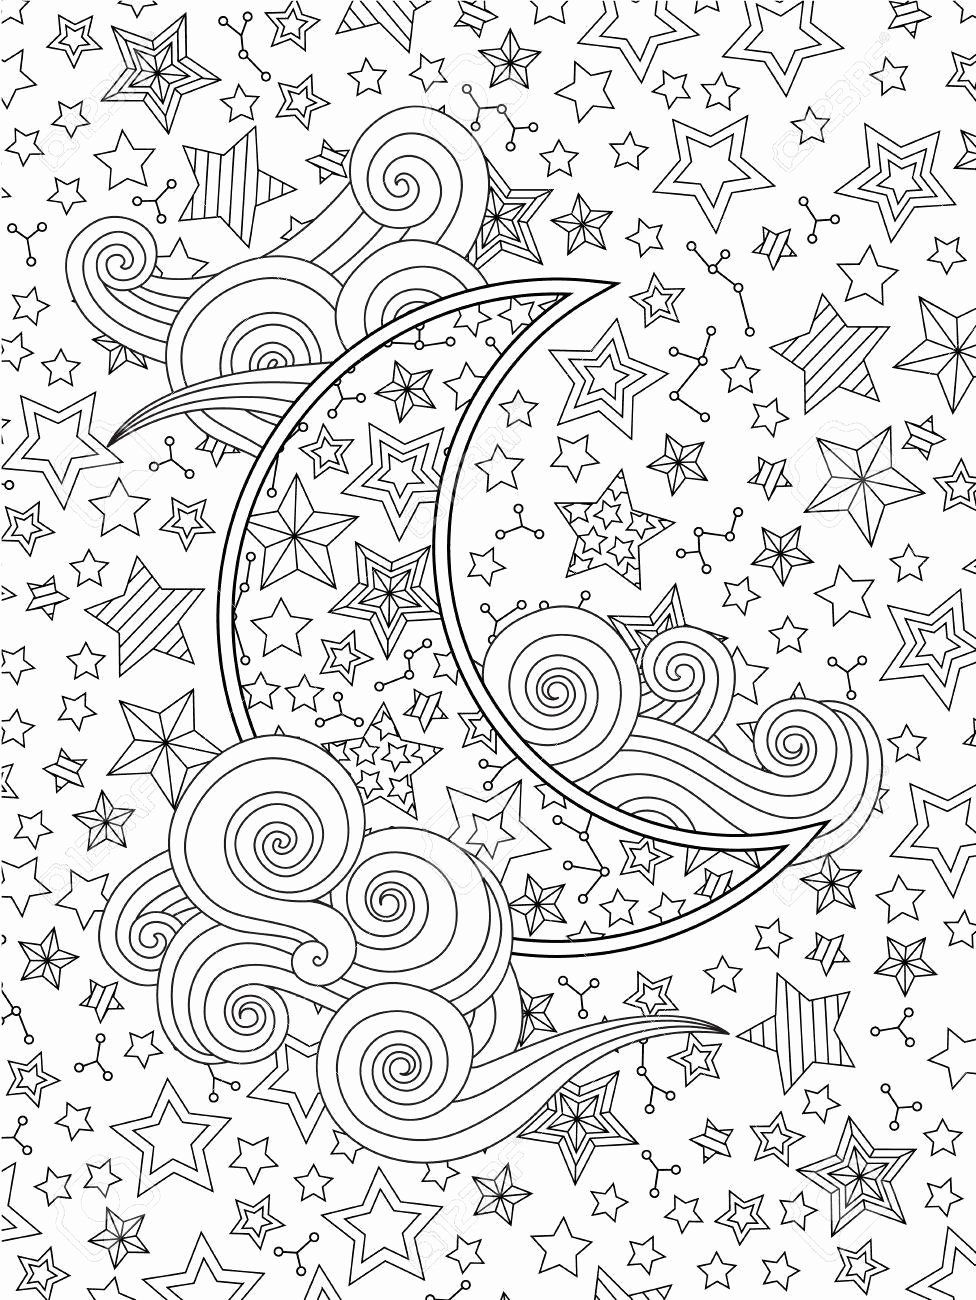 Star coloring pages for adults luxury contour image of moon crescent clouds stars on the skyâ star coloring pages mandala coloring pages detailed coloring pages